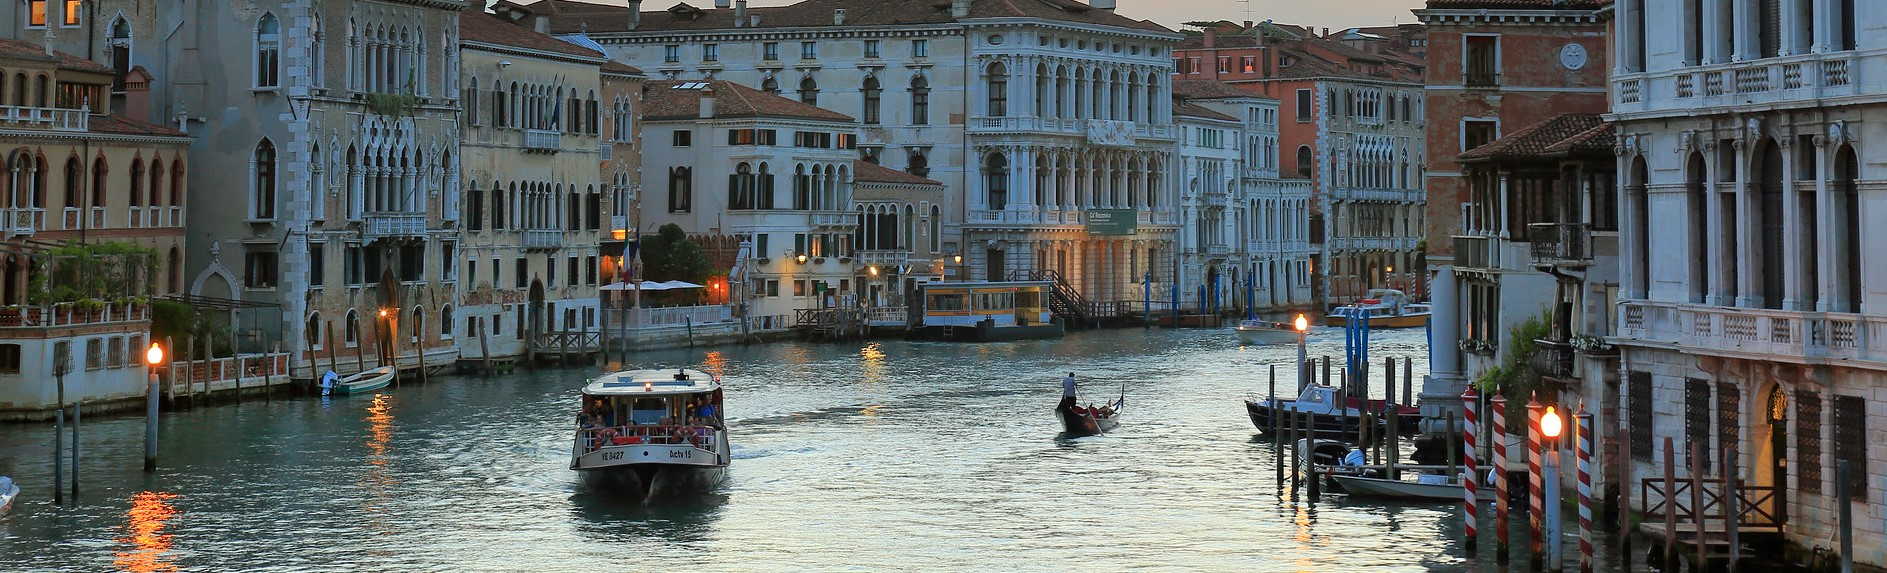 What attractions are worth the visit to Venice?